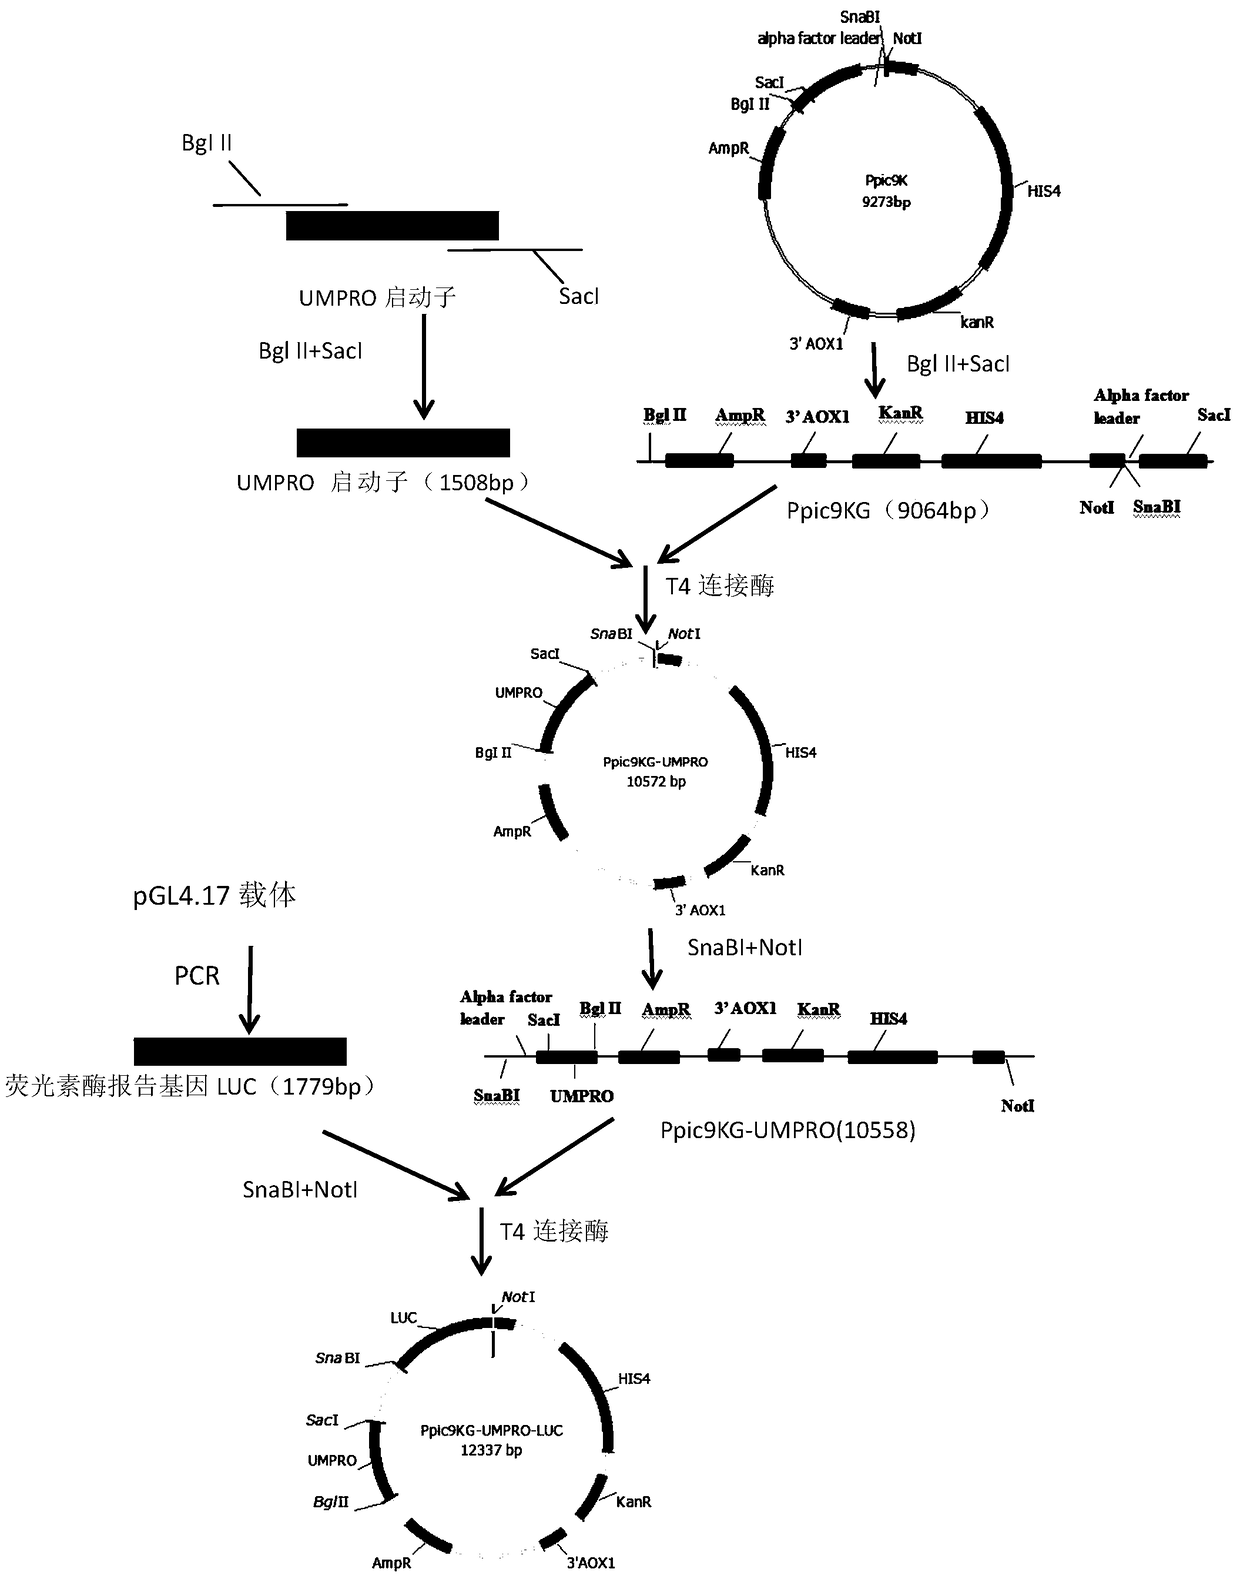 A cell-screening model for downregulators targeting fungal cell wall chitin synthase